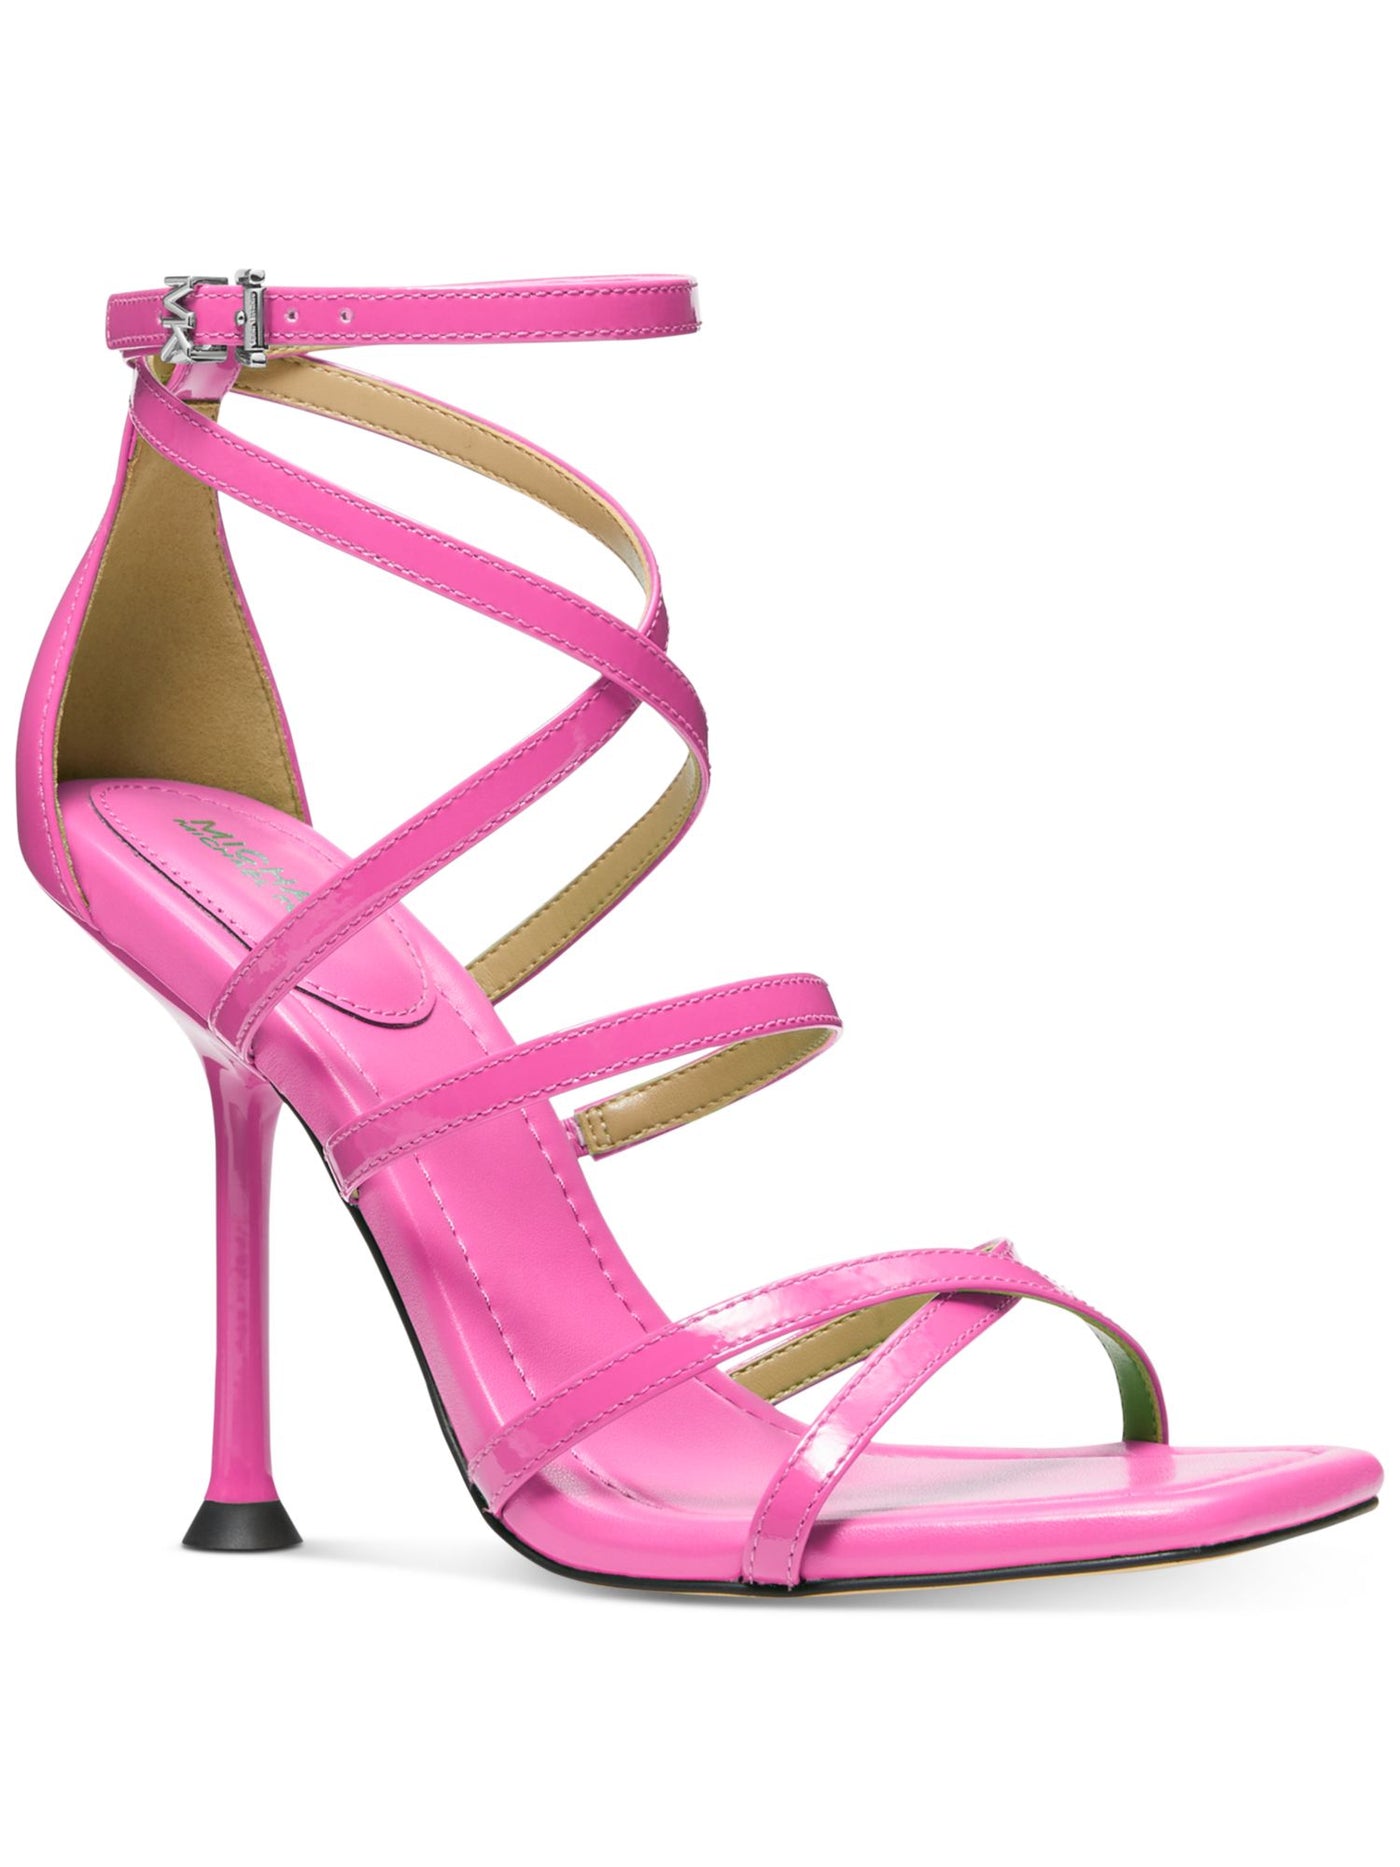 MICHAEL MICHAEL KORS Womens Pink Padded Strappy Imani Square Toe Sculpted Heel Buckle Leather Dress Heeled Sandal 11 M